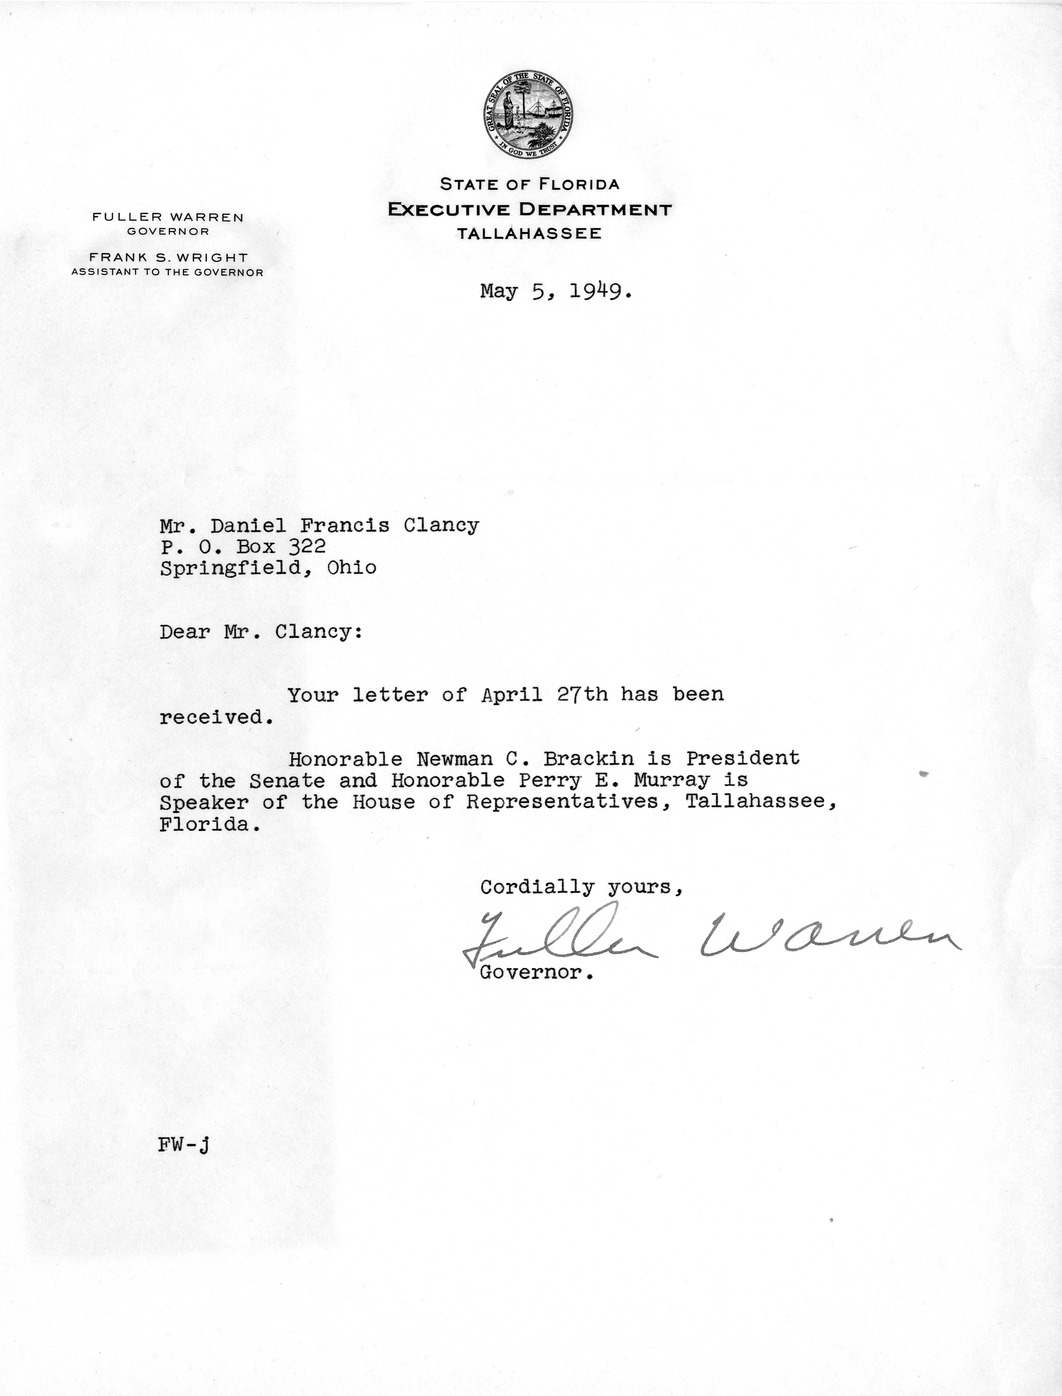 Letter from Governor Fuller Warren to Daniel F. Clancy